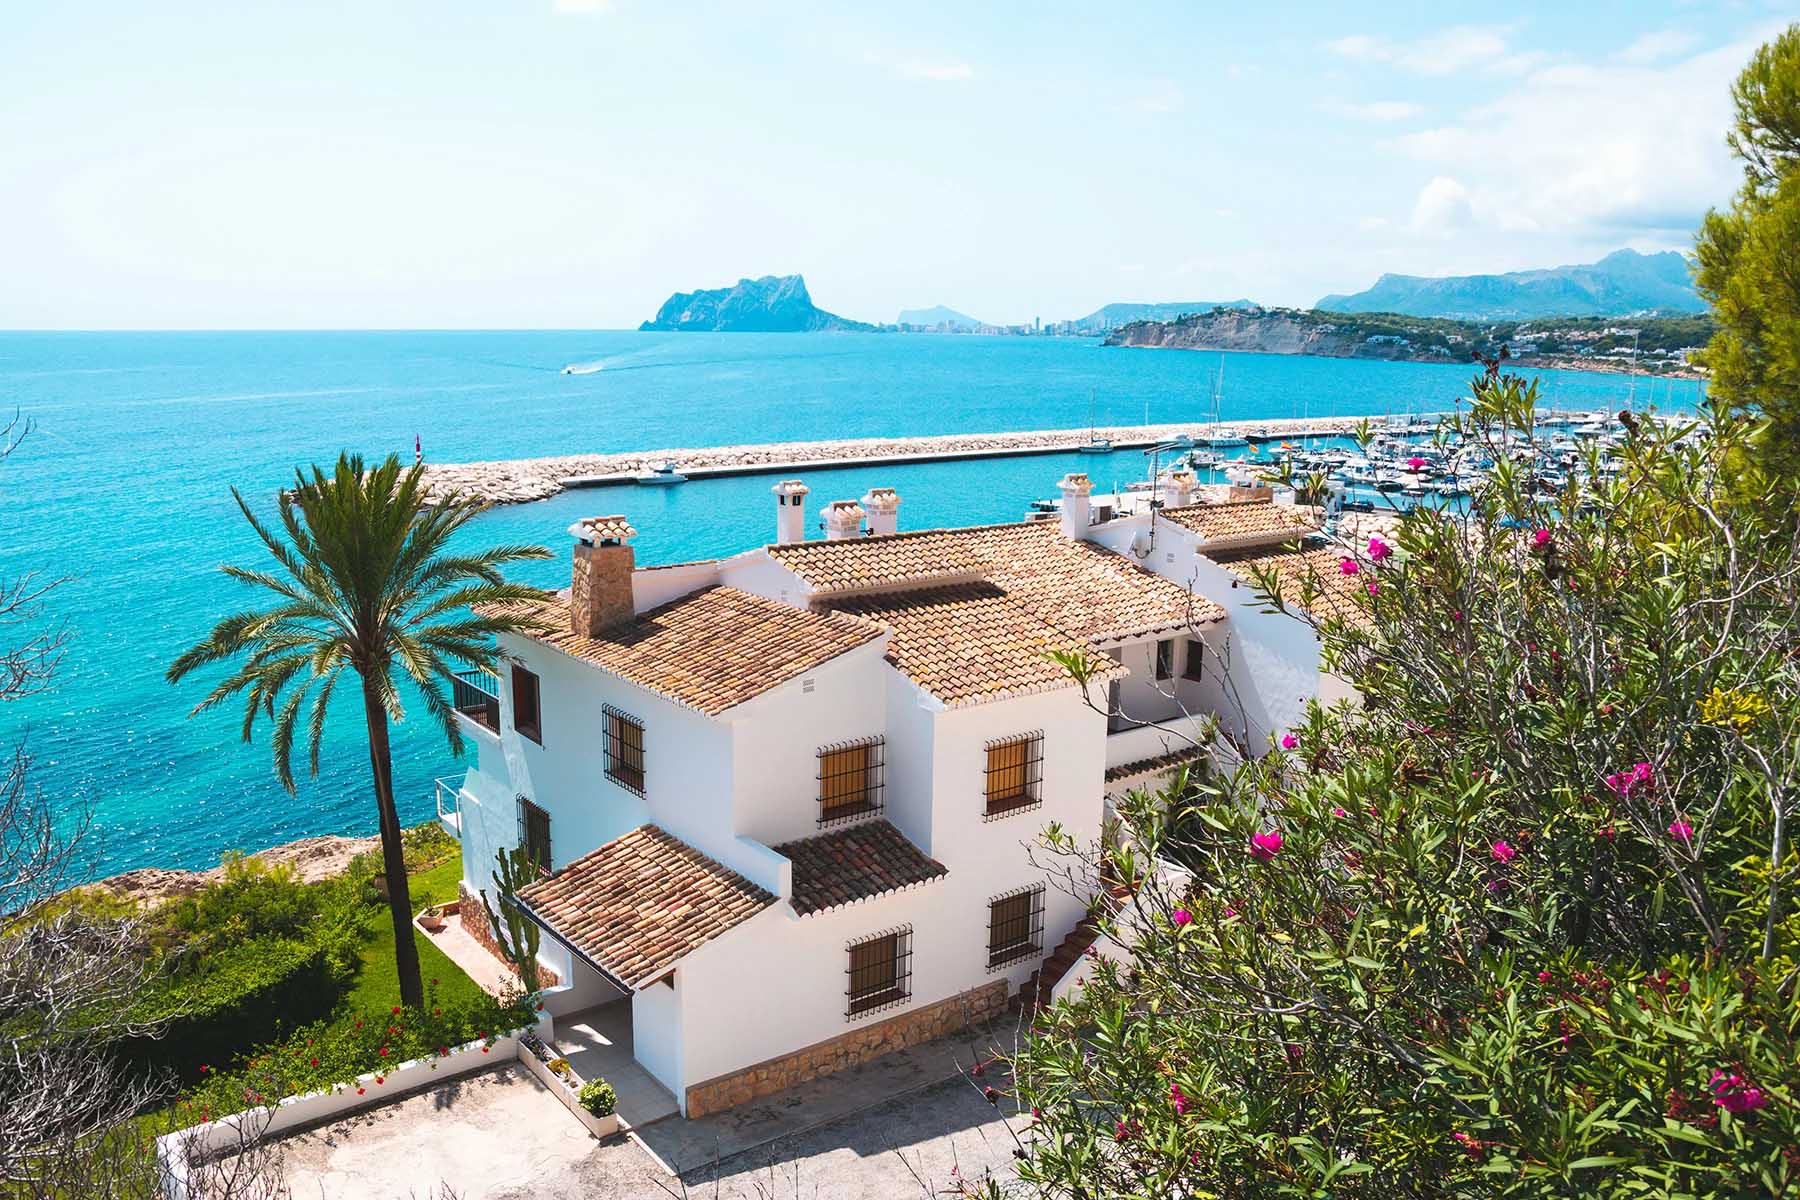 A coastal villa with a view of the bluest of blue seas in Moraira, Spain